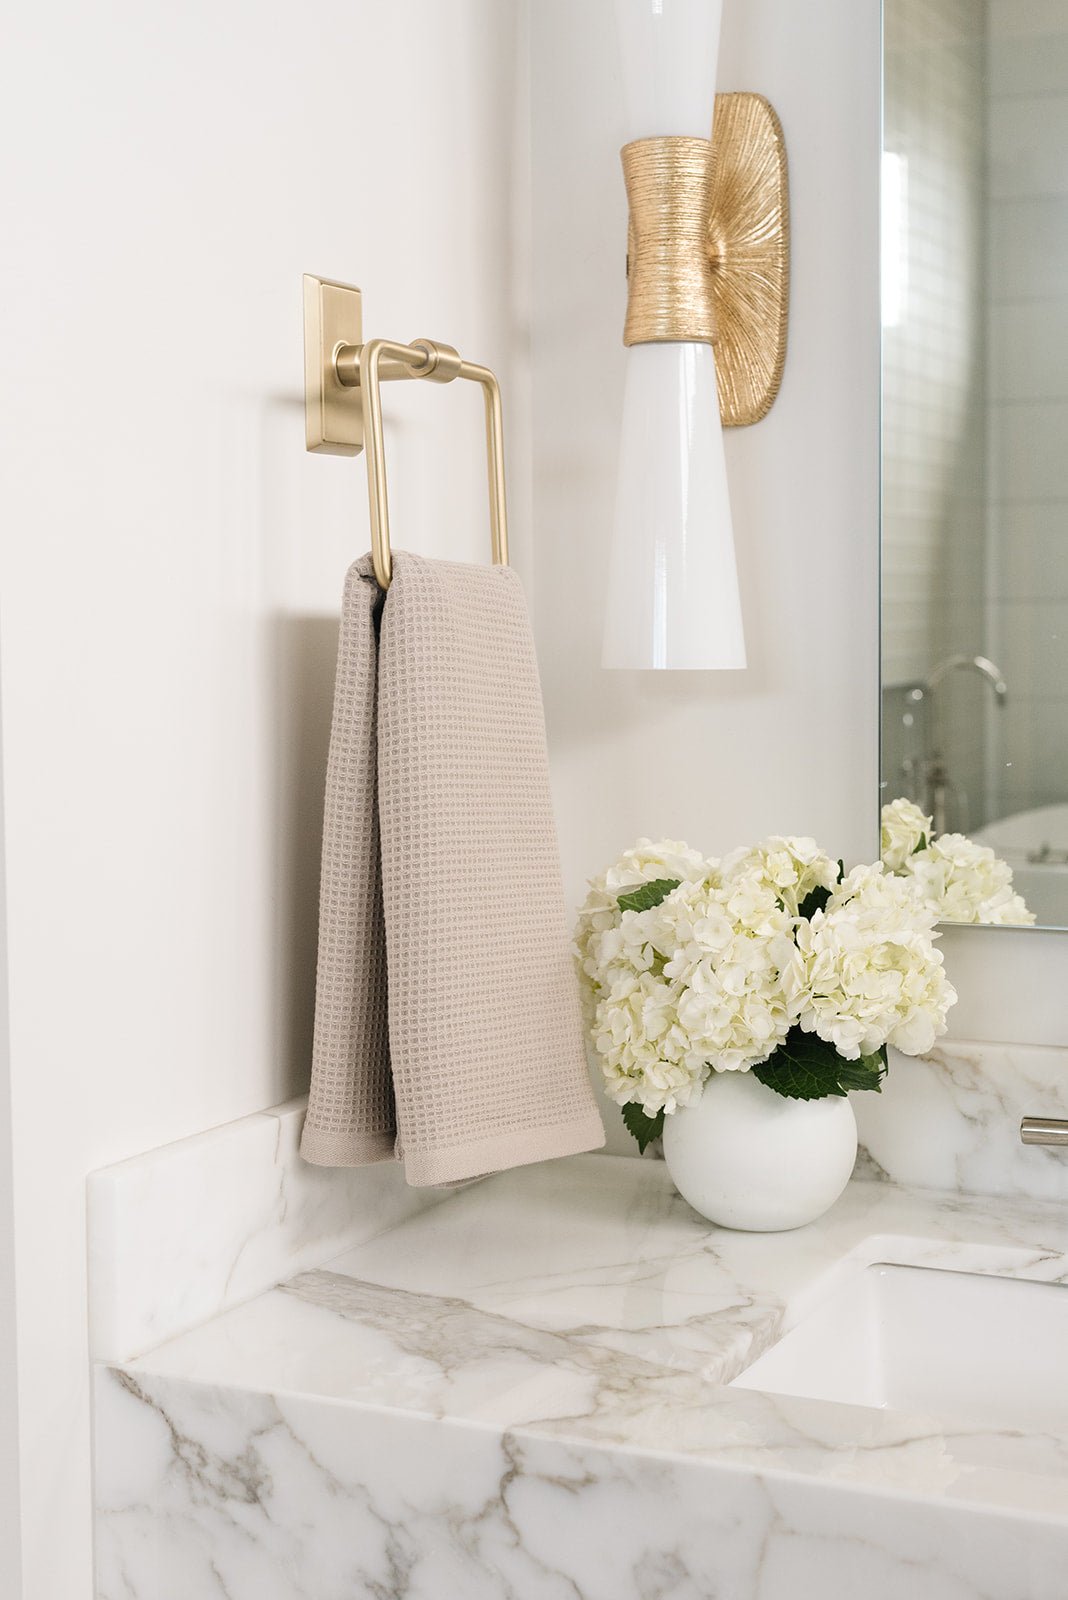 Sand Waffle Hand Towel hanging from a gold towel ring.  The photo was taken at a white marble bathroom sink. |Color:Sand